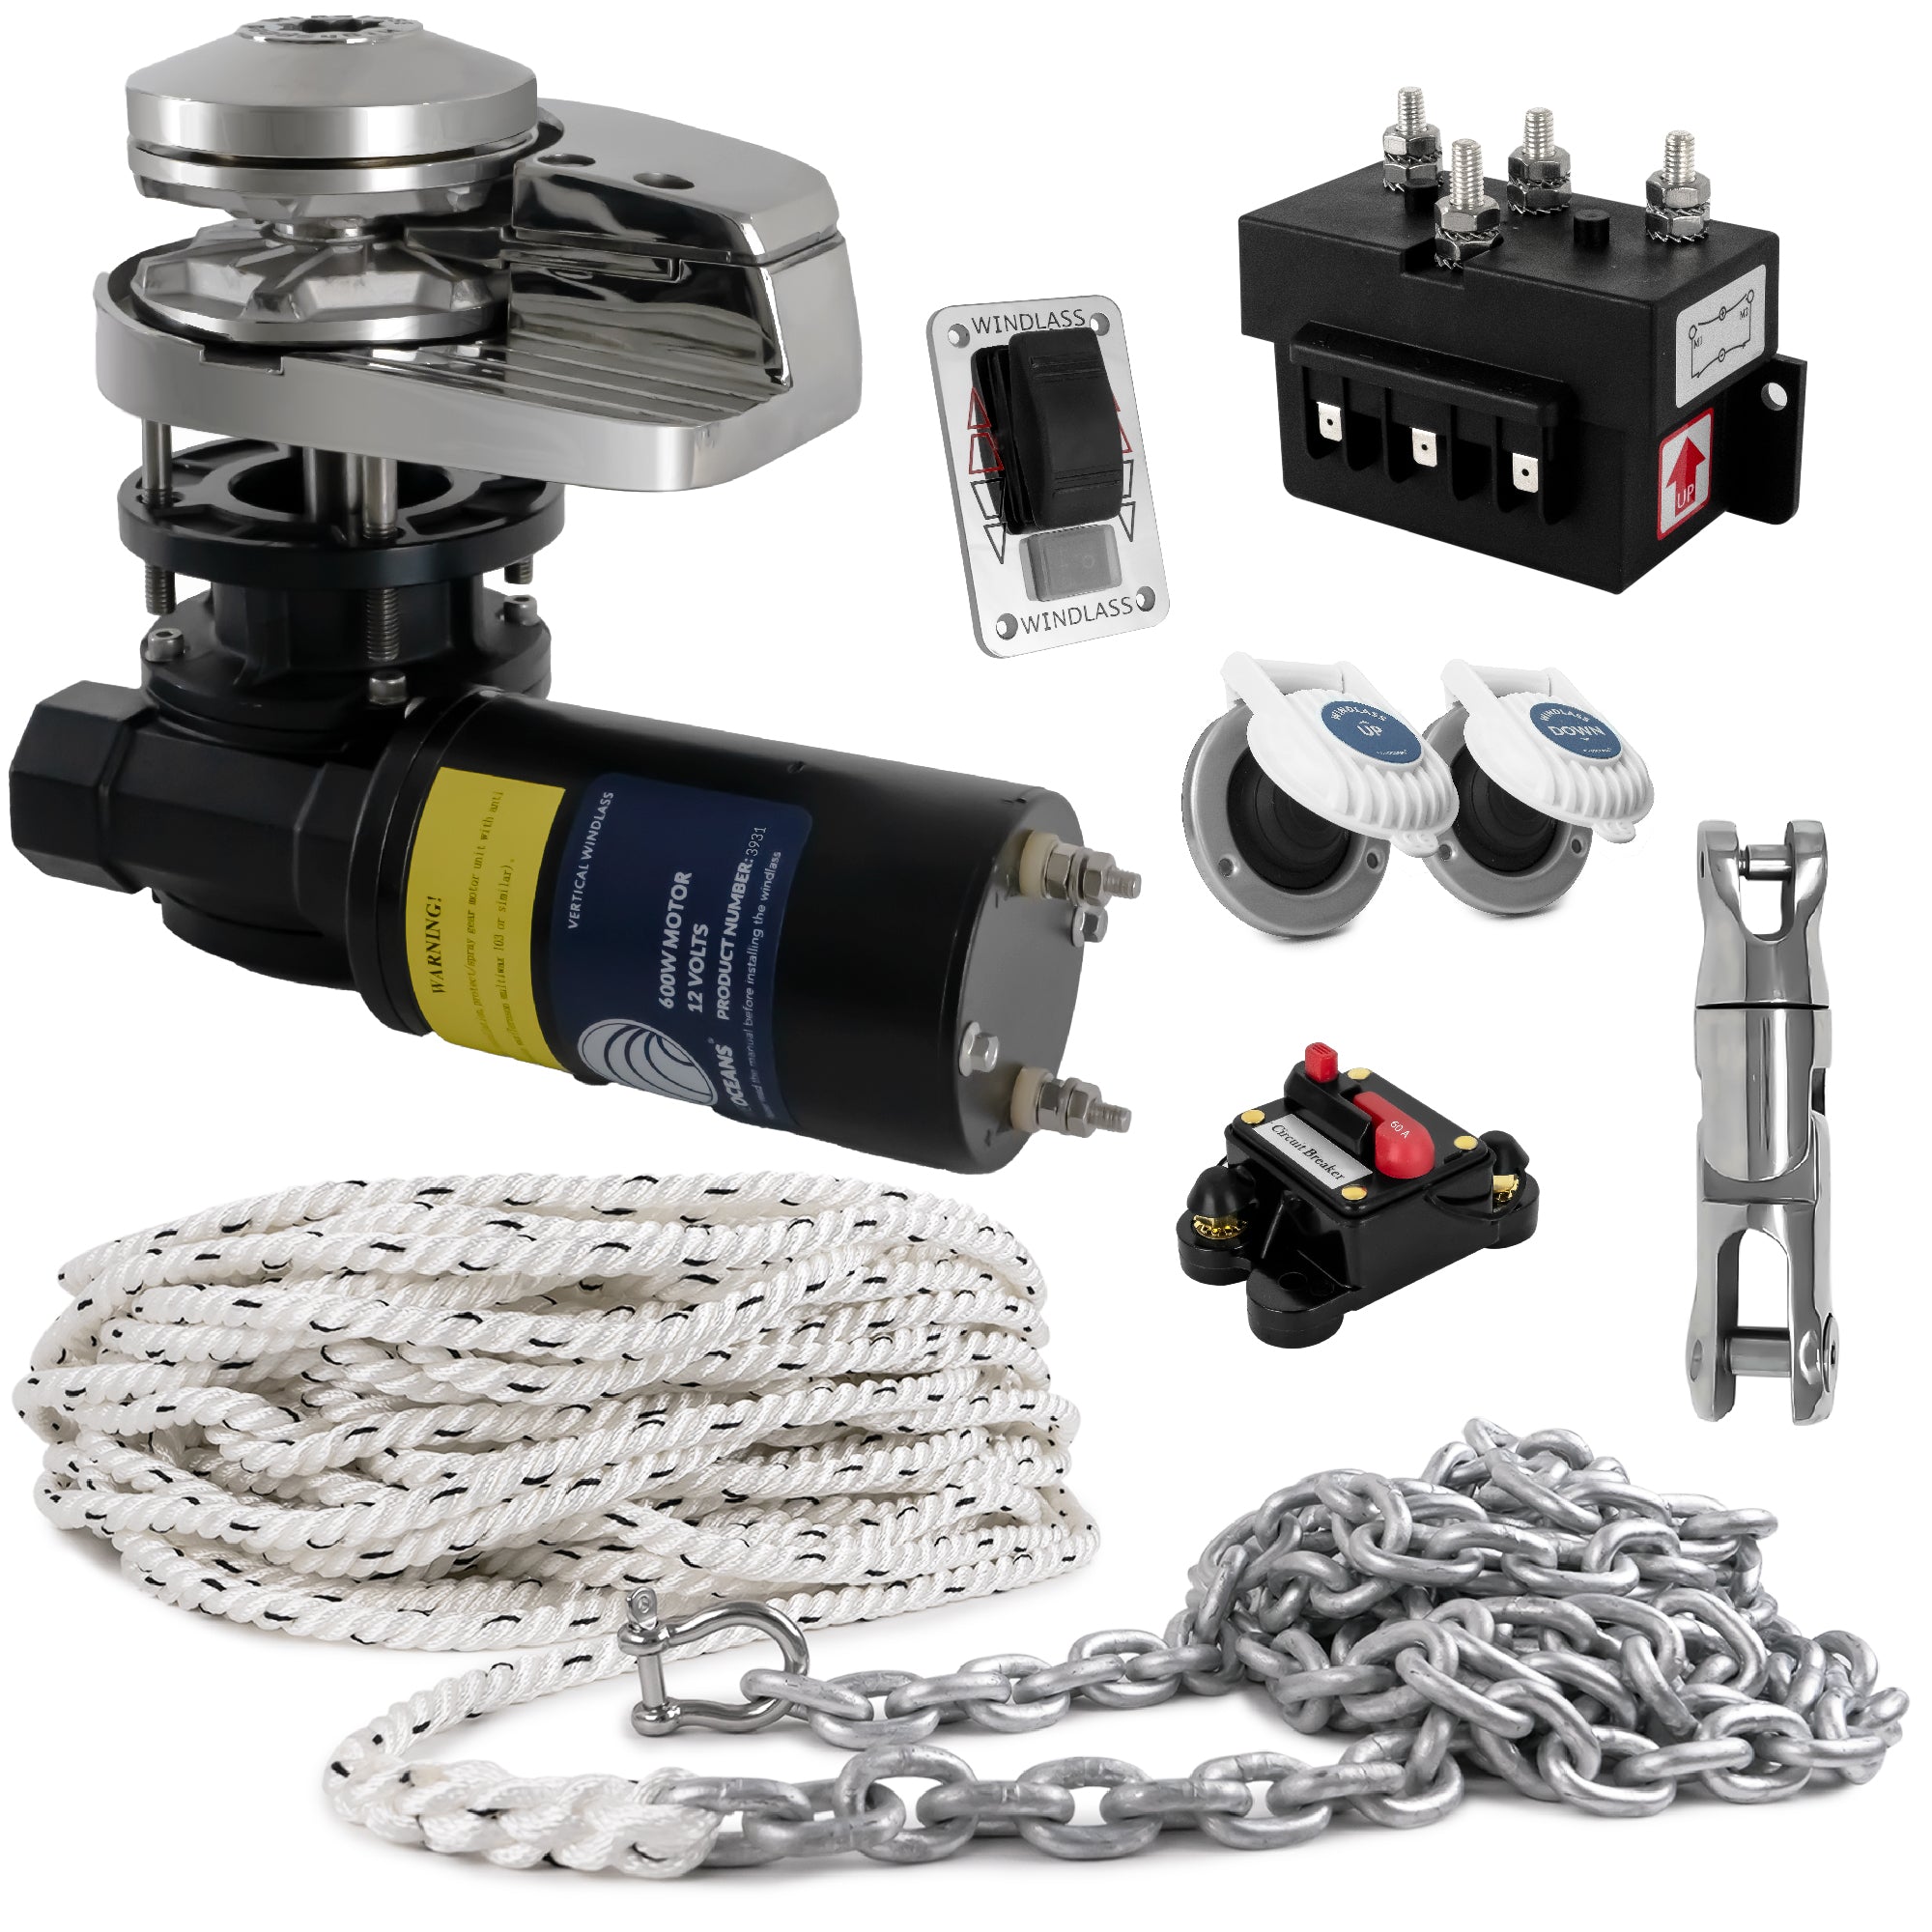 Pacific Windlass Kit, Vertical 600 Watts, 12V DC, 3-Strand Rope, Galvanized Steel HT G4 Chain, Swivel and Shackle - FO3931-C3